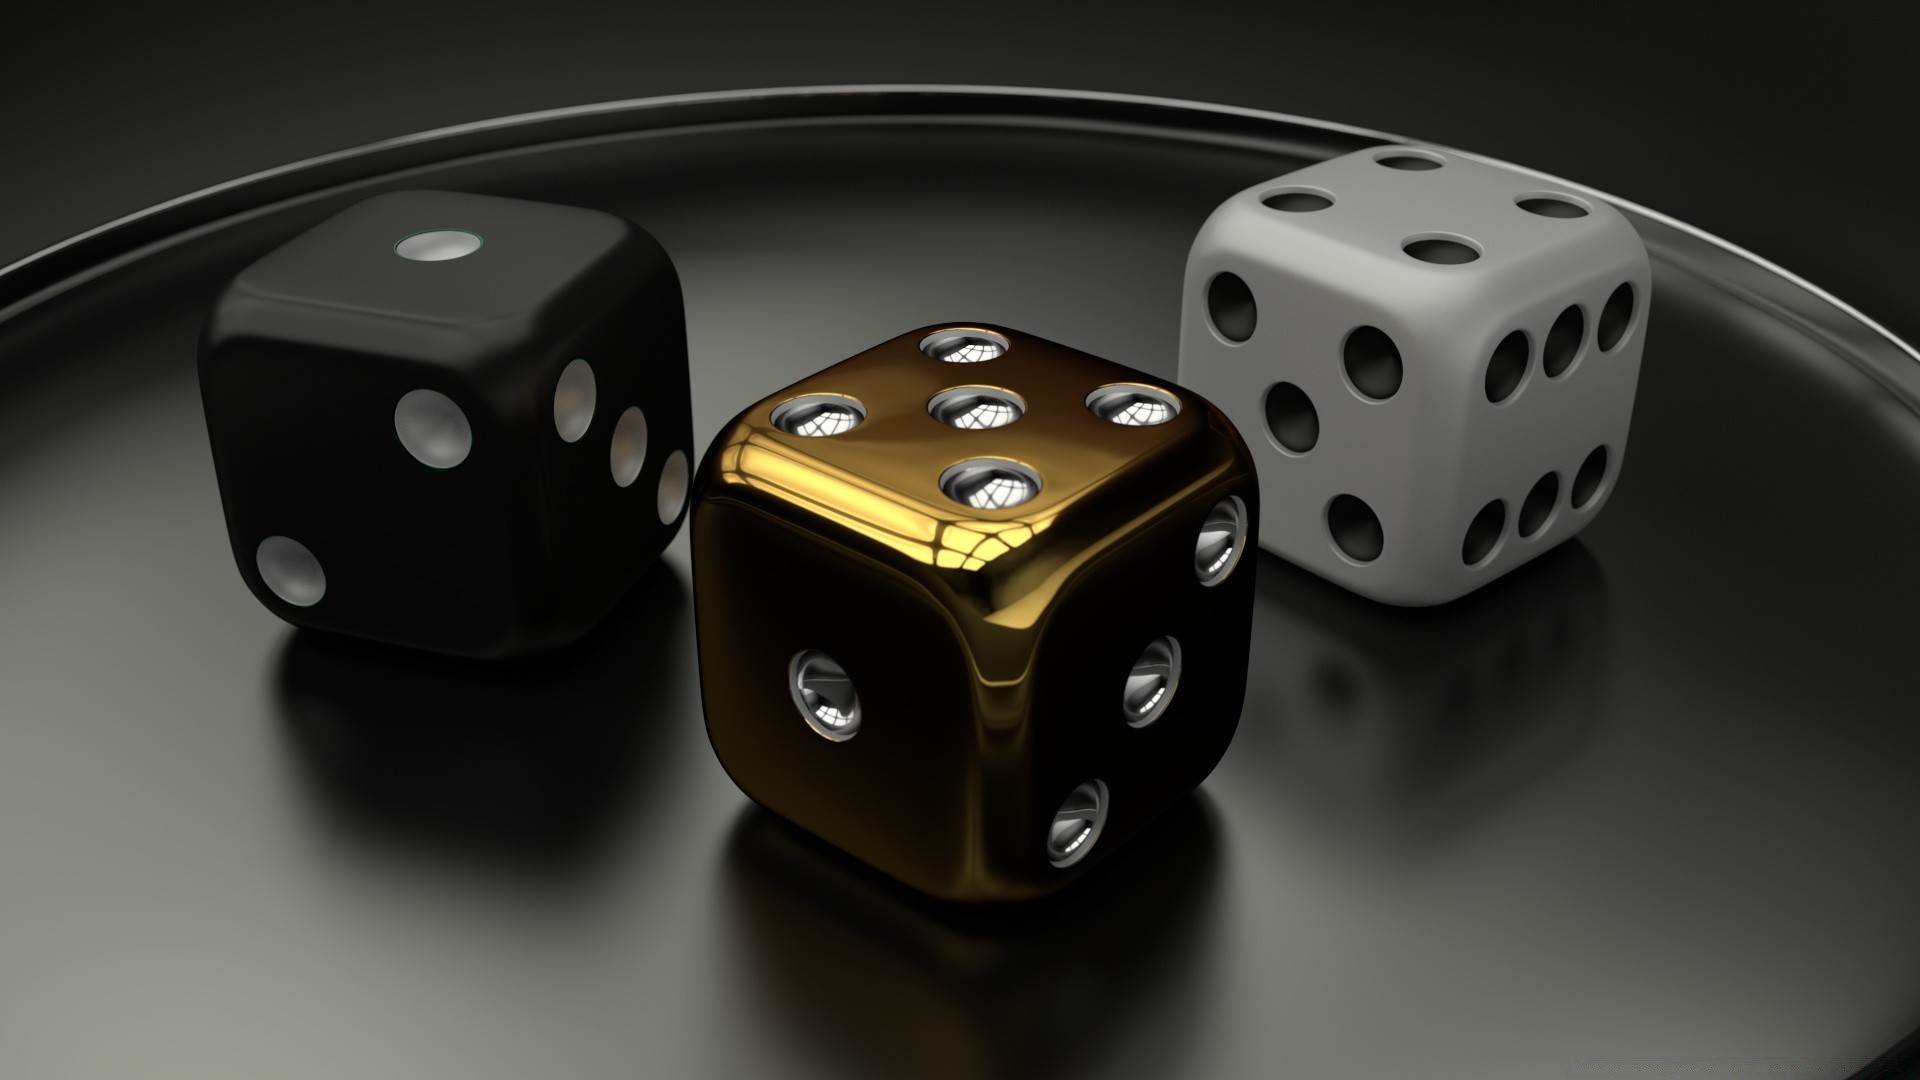 3d graphics dice chance luck gambling casino risk craps die lucky game leisure still life poker technology opportunity